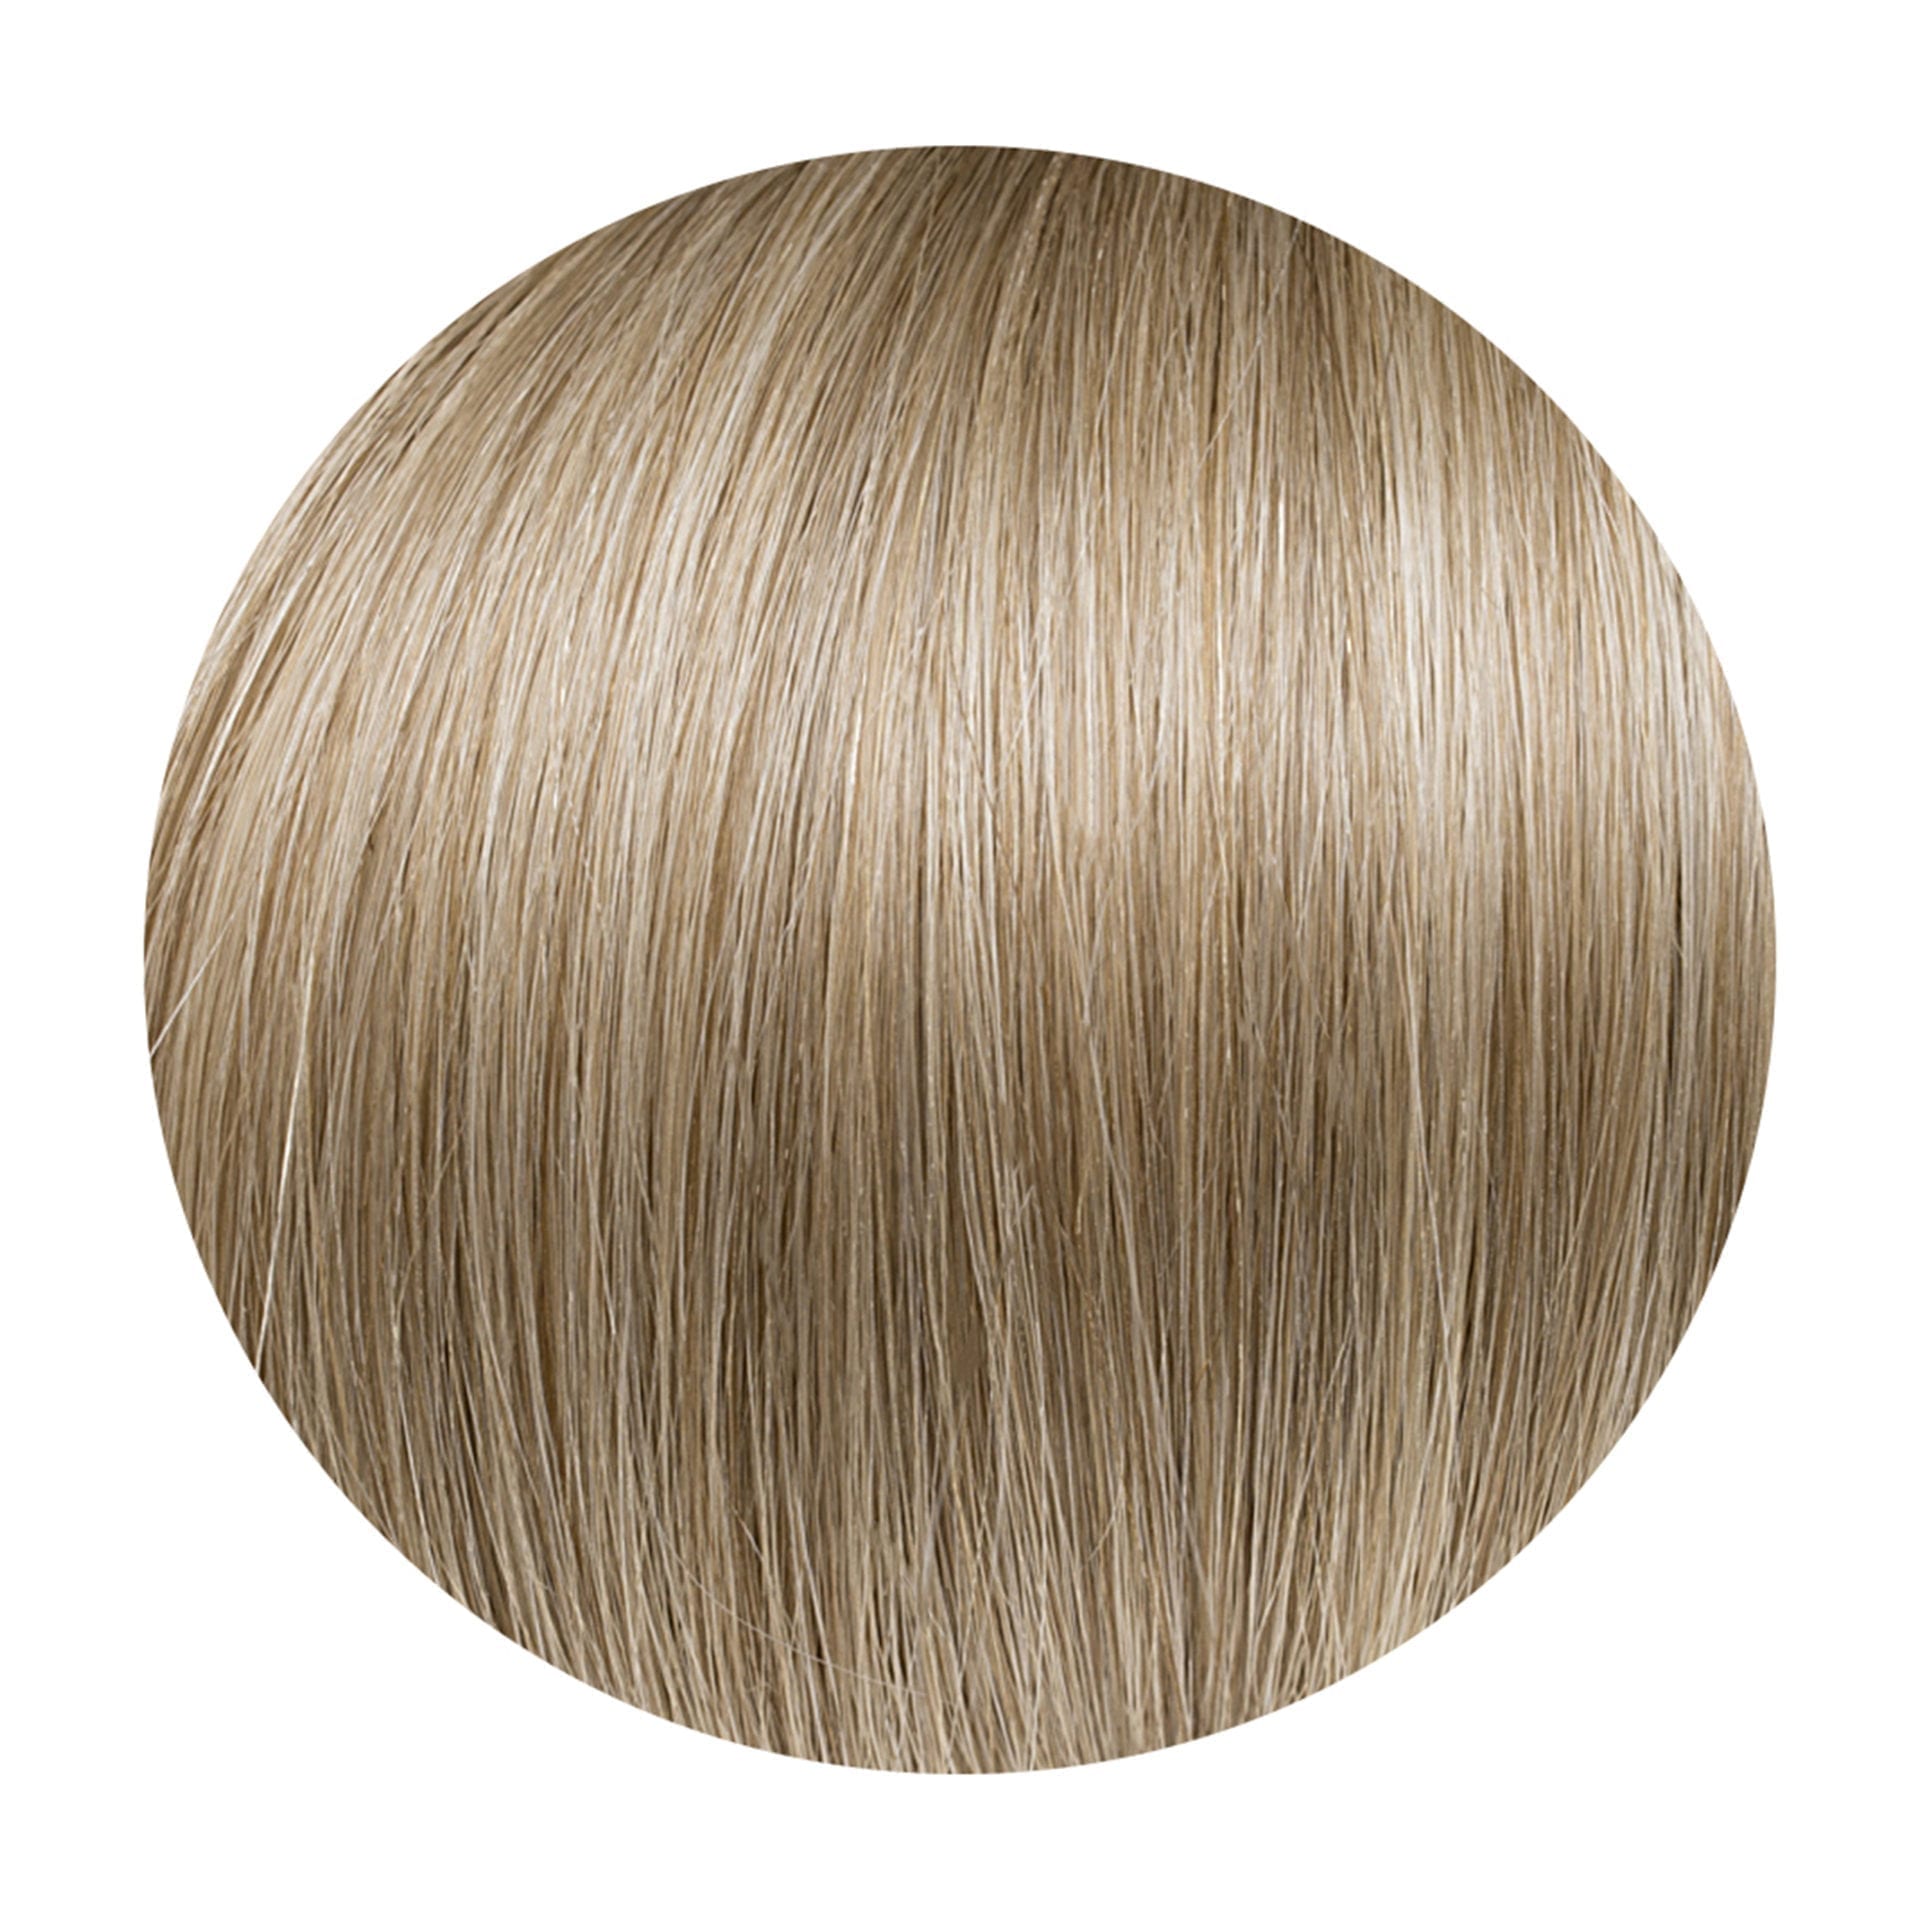 Coffee n Cream Balayage Colour Human Hair Extensions Clip in 5 Piece